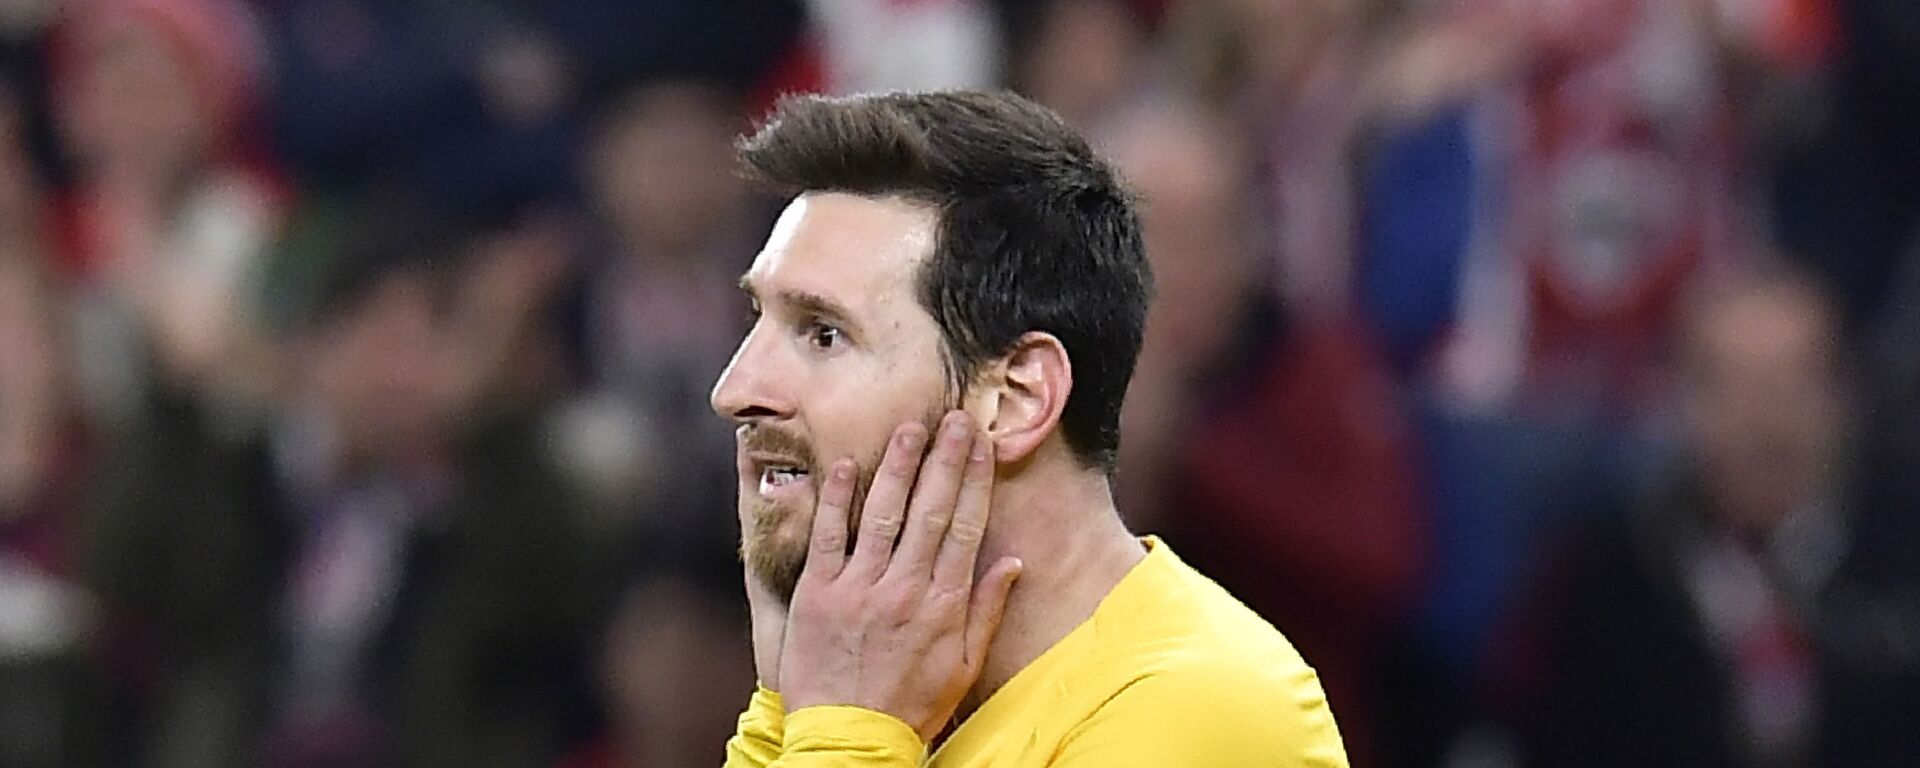 Barcelona's Lionel Messi reacts after a missed scoring opportunity during the Spanish Copa del Rey - Sputnik International, 1920, 13.07.2020